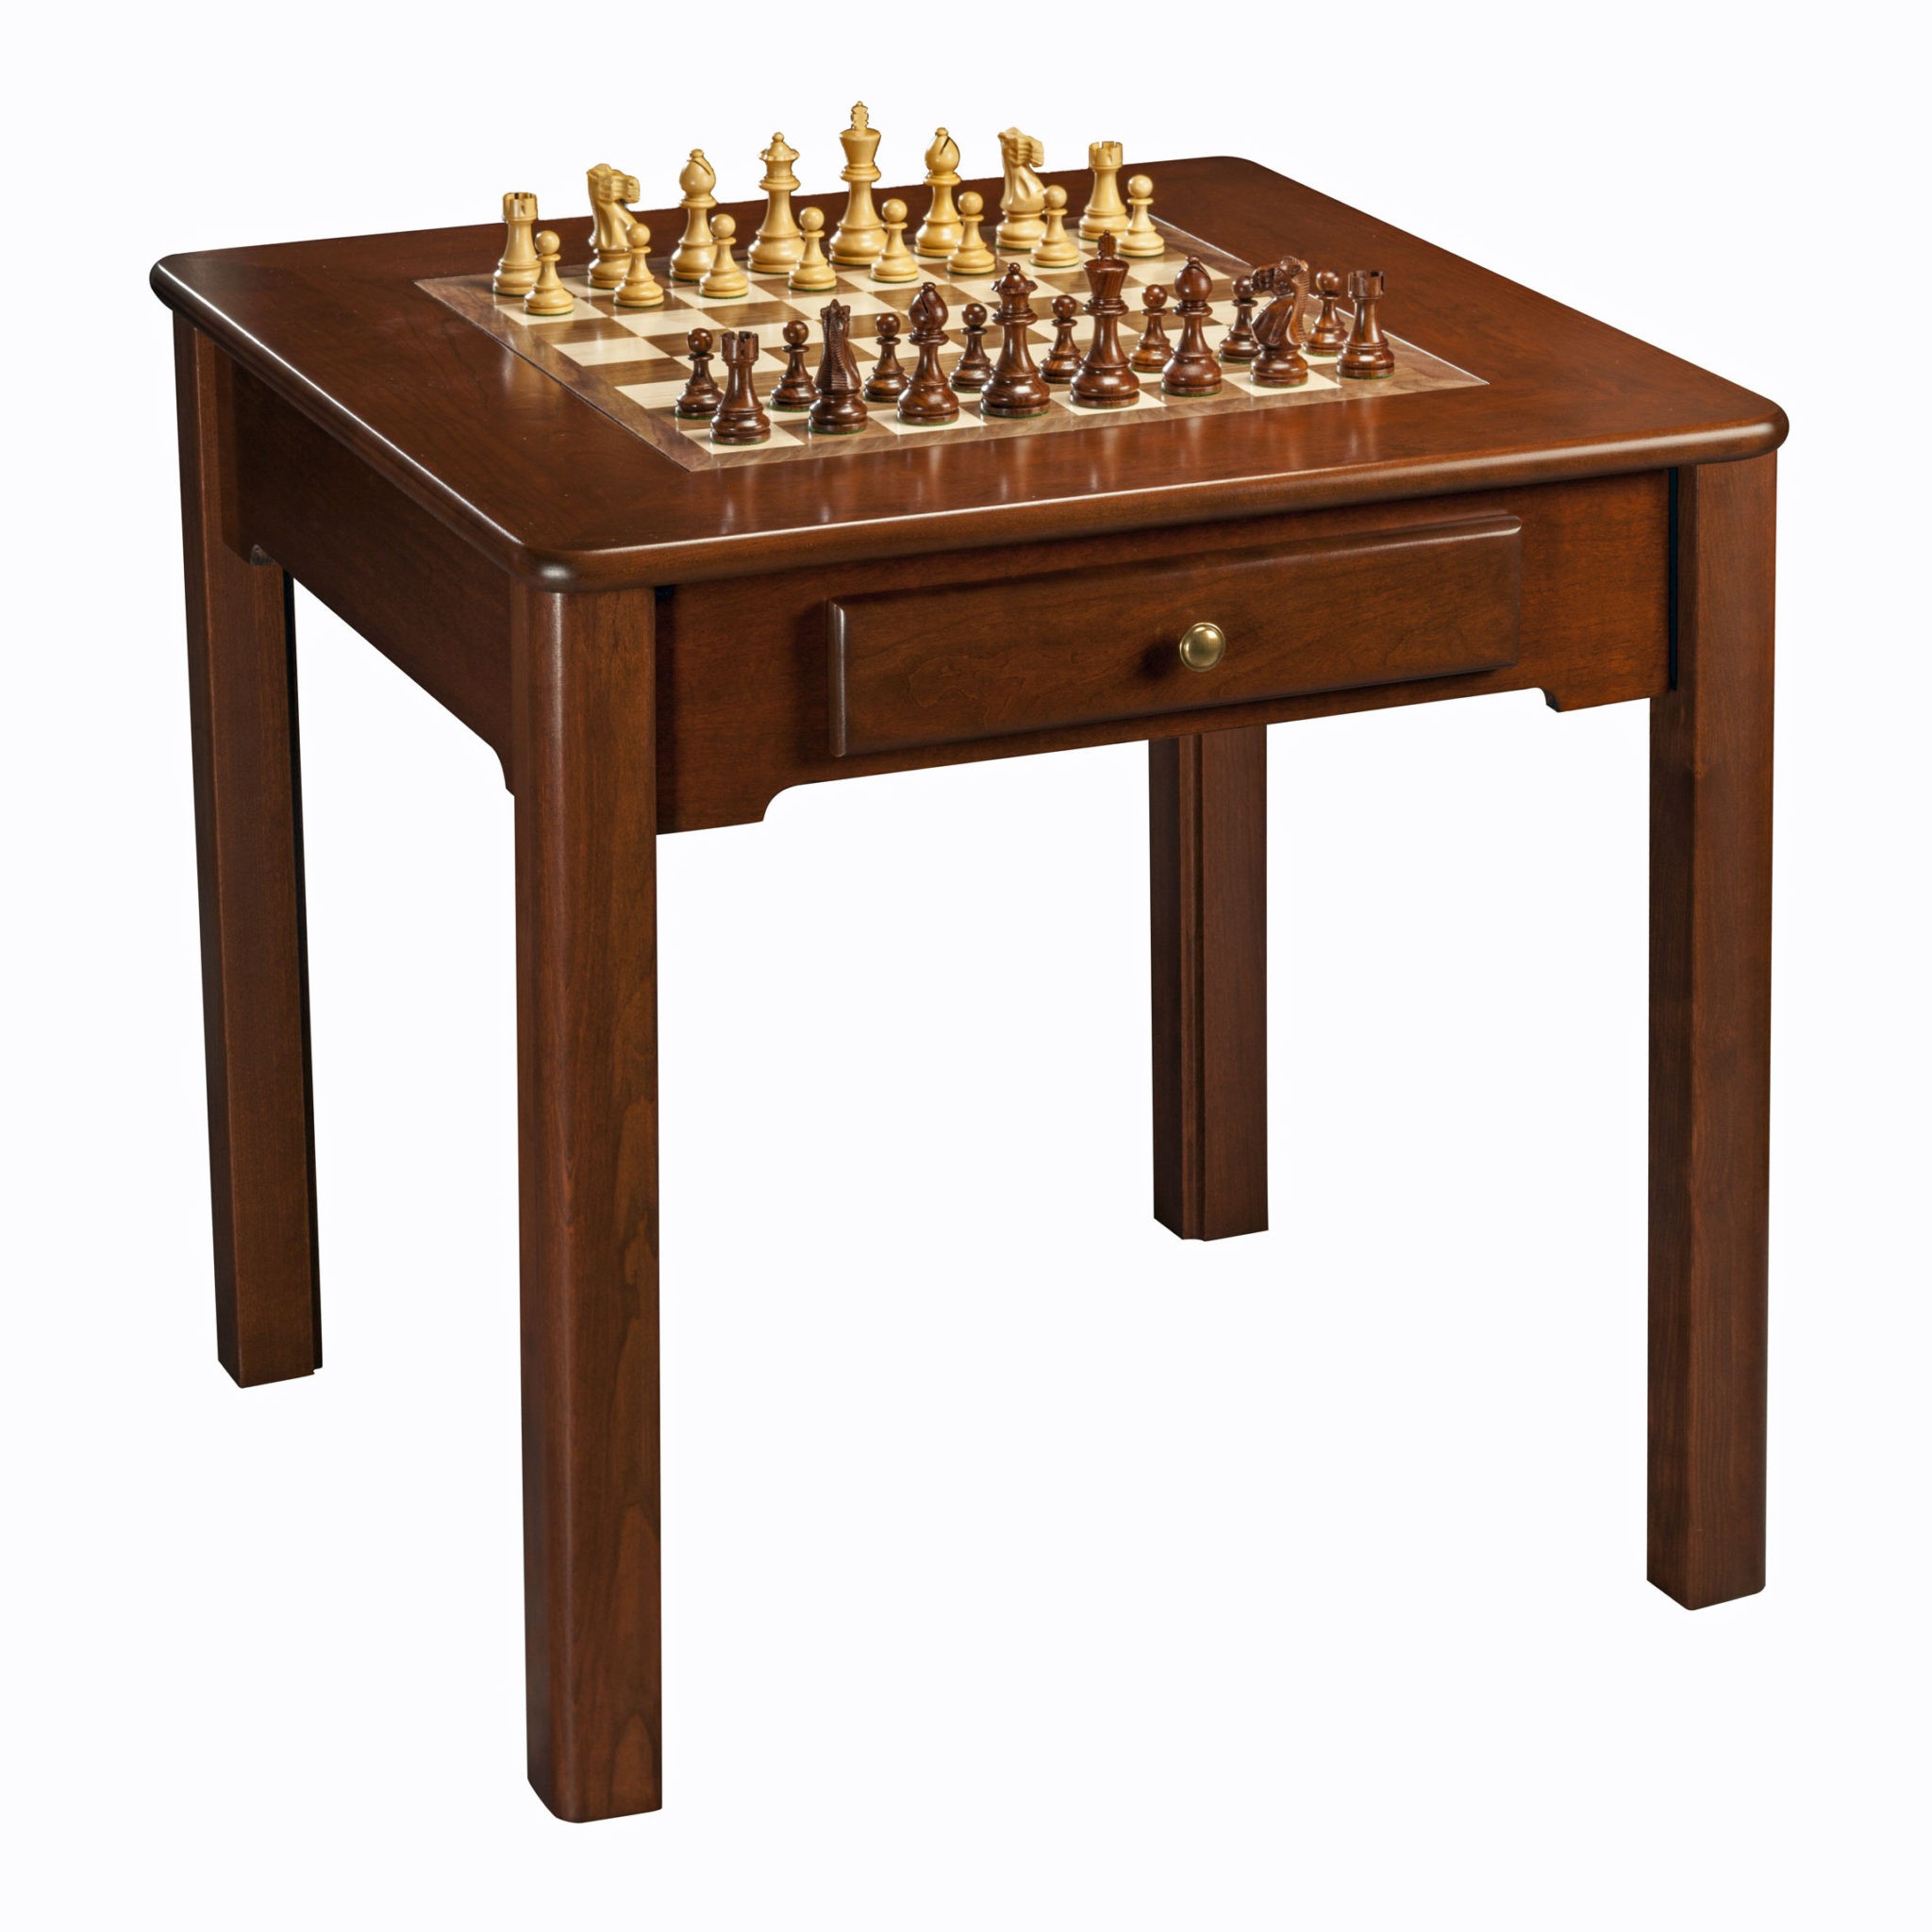 Classic game table solid cherry wood chess checkers